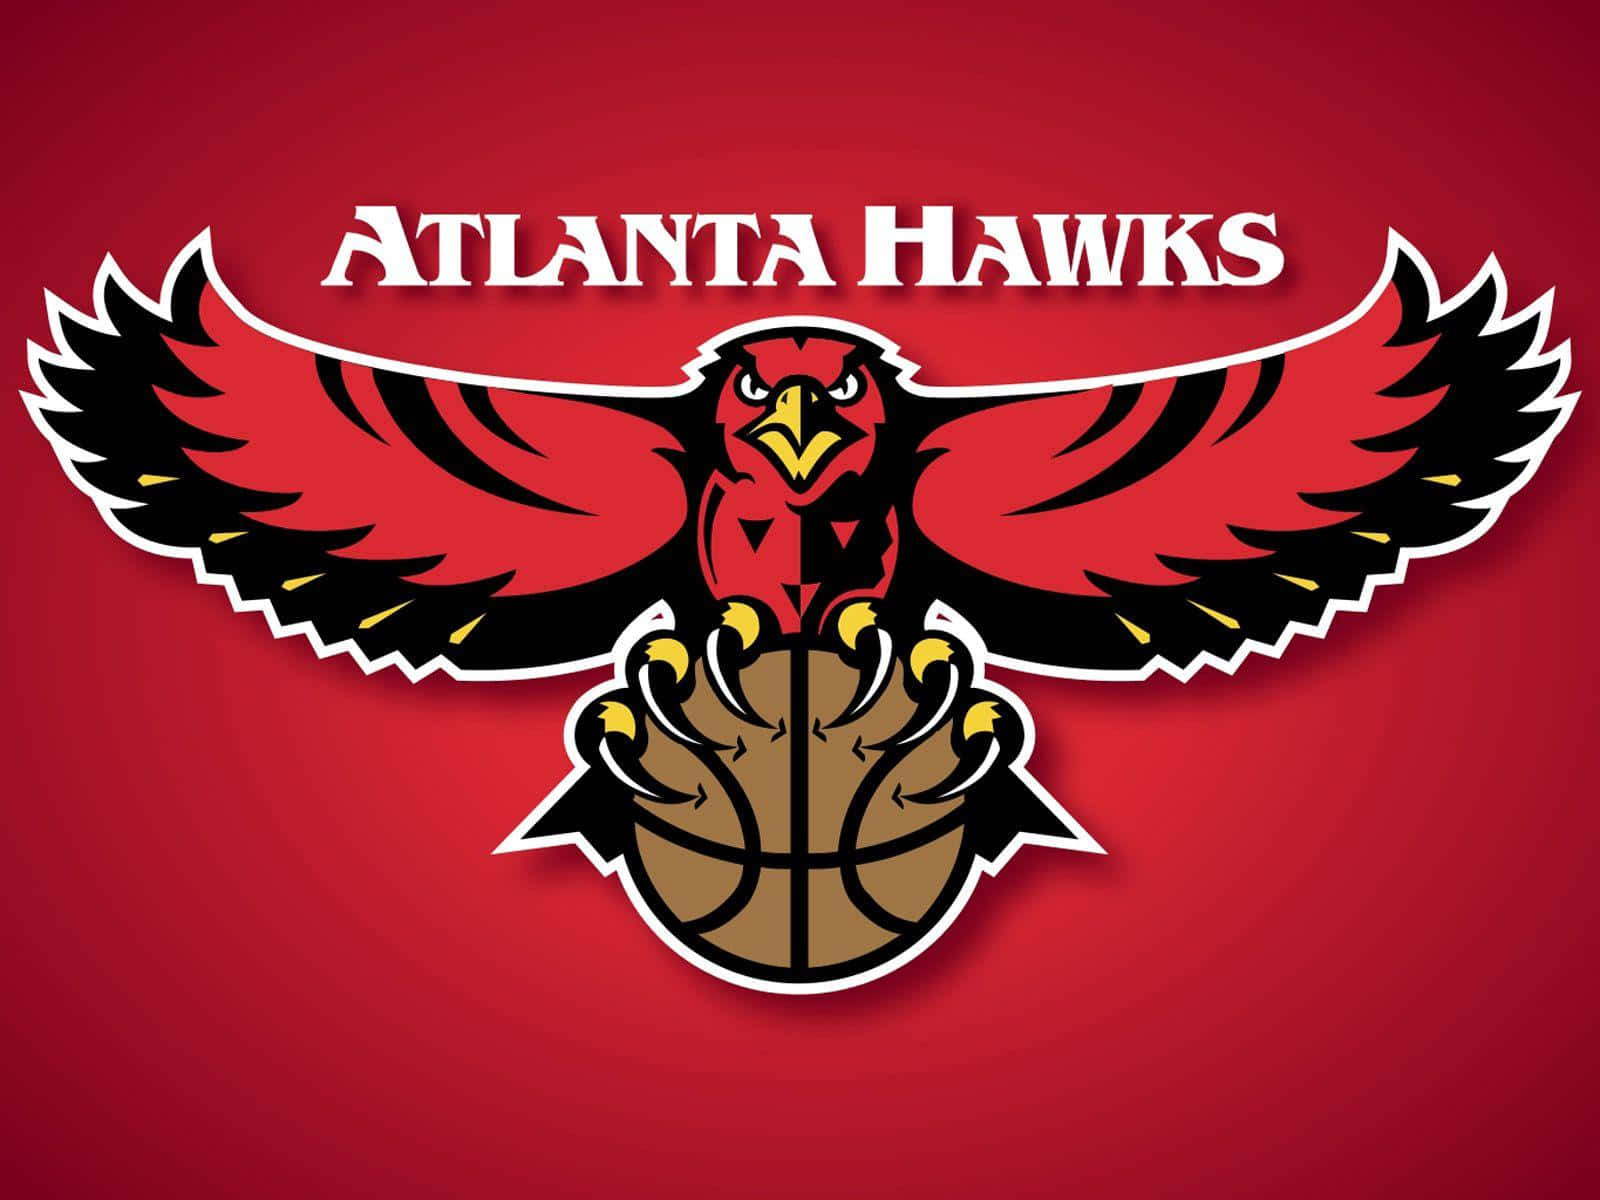 Show your support for the Atlanta Hawks!